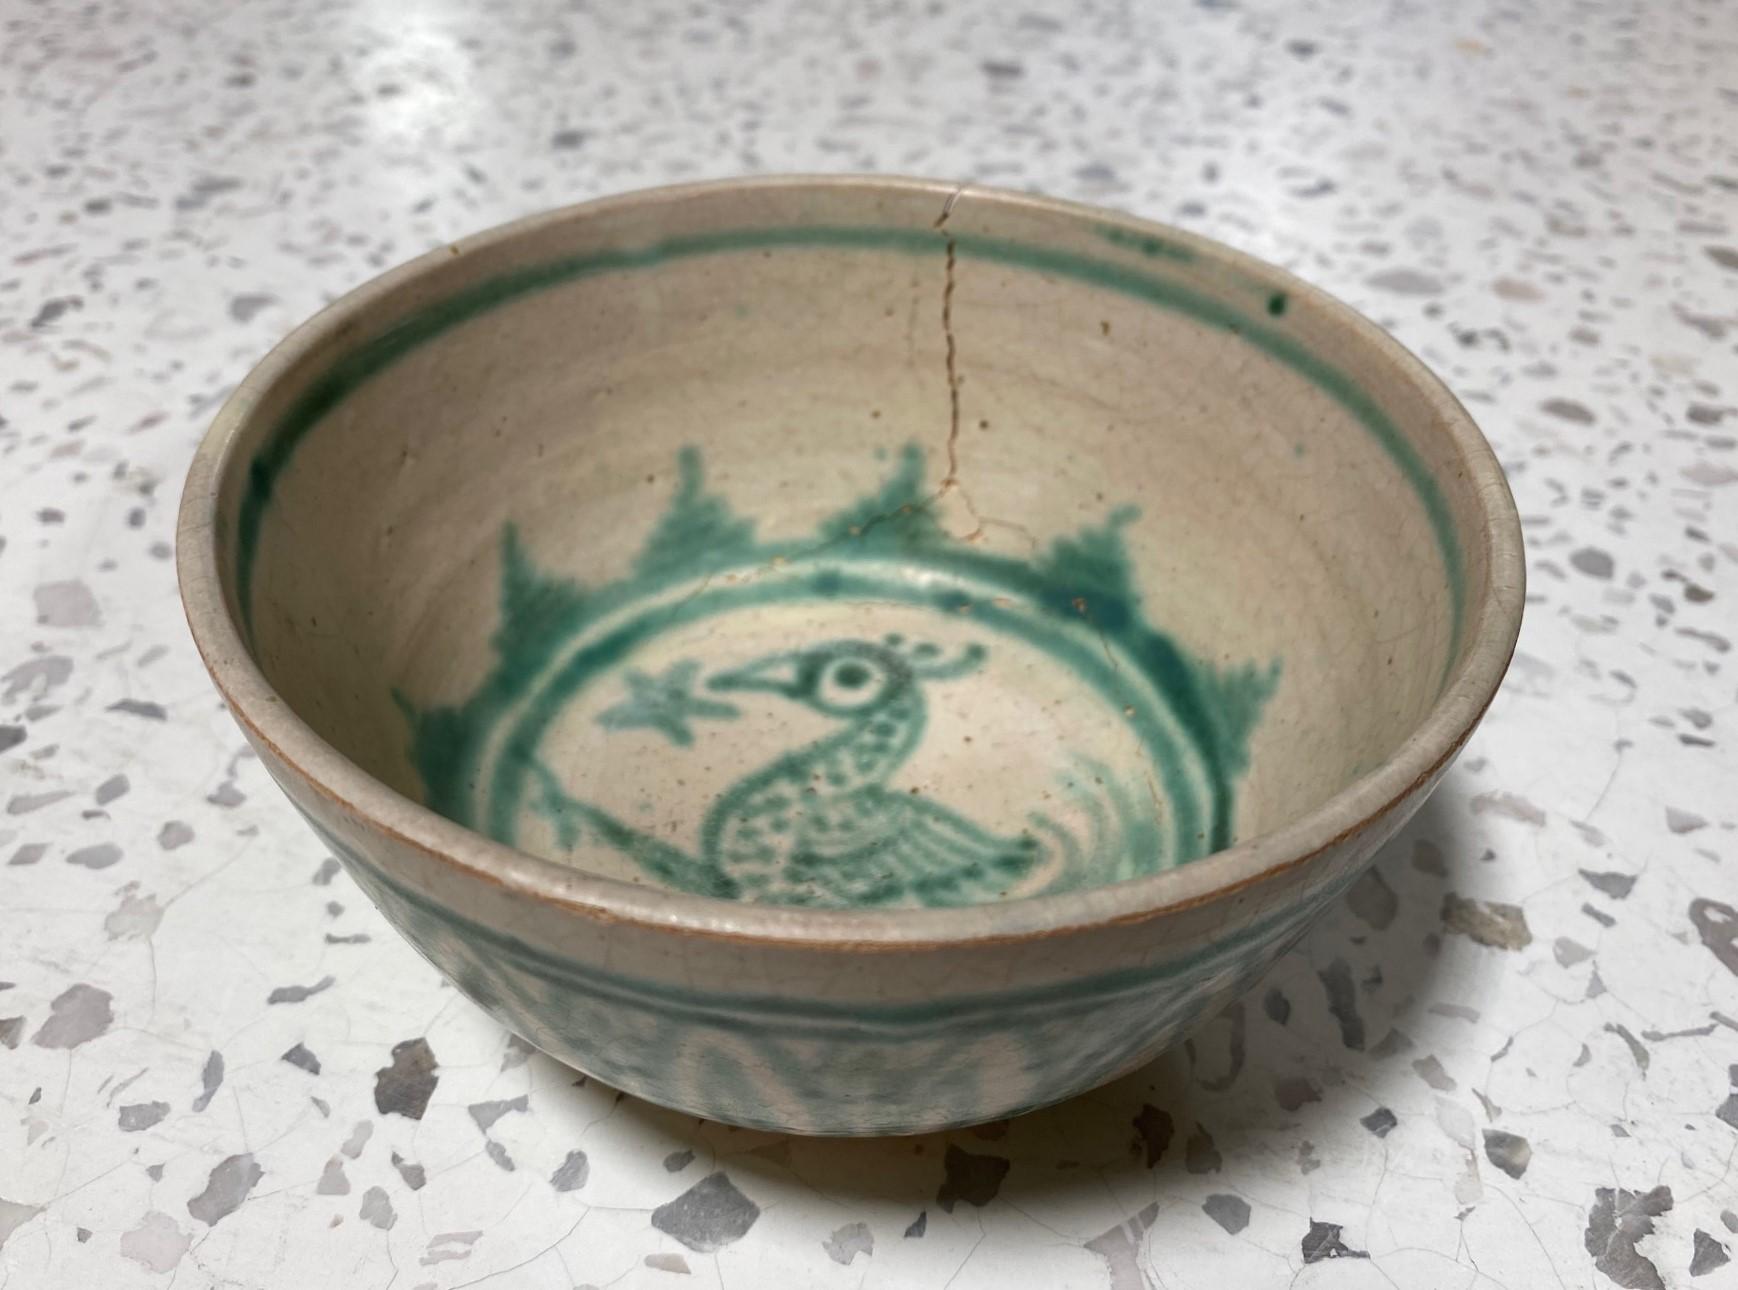 A beautiful and somewhat rare Burmese (Burma/Myanmar) 15th-century hand-painted and decorated green and white earthenware bowl. The piece is decorated with a bird in the center and has a stylized motif of green lotus petals painted against a